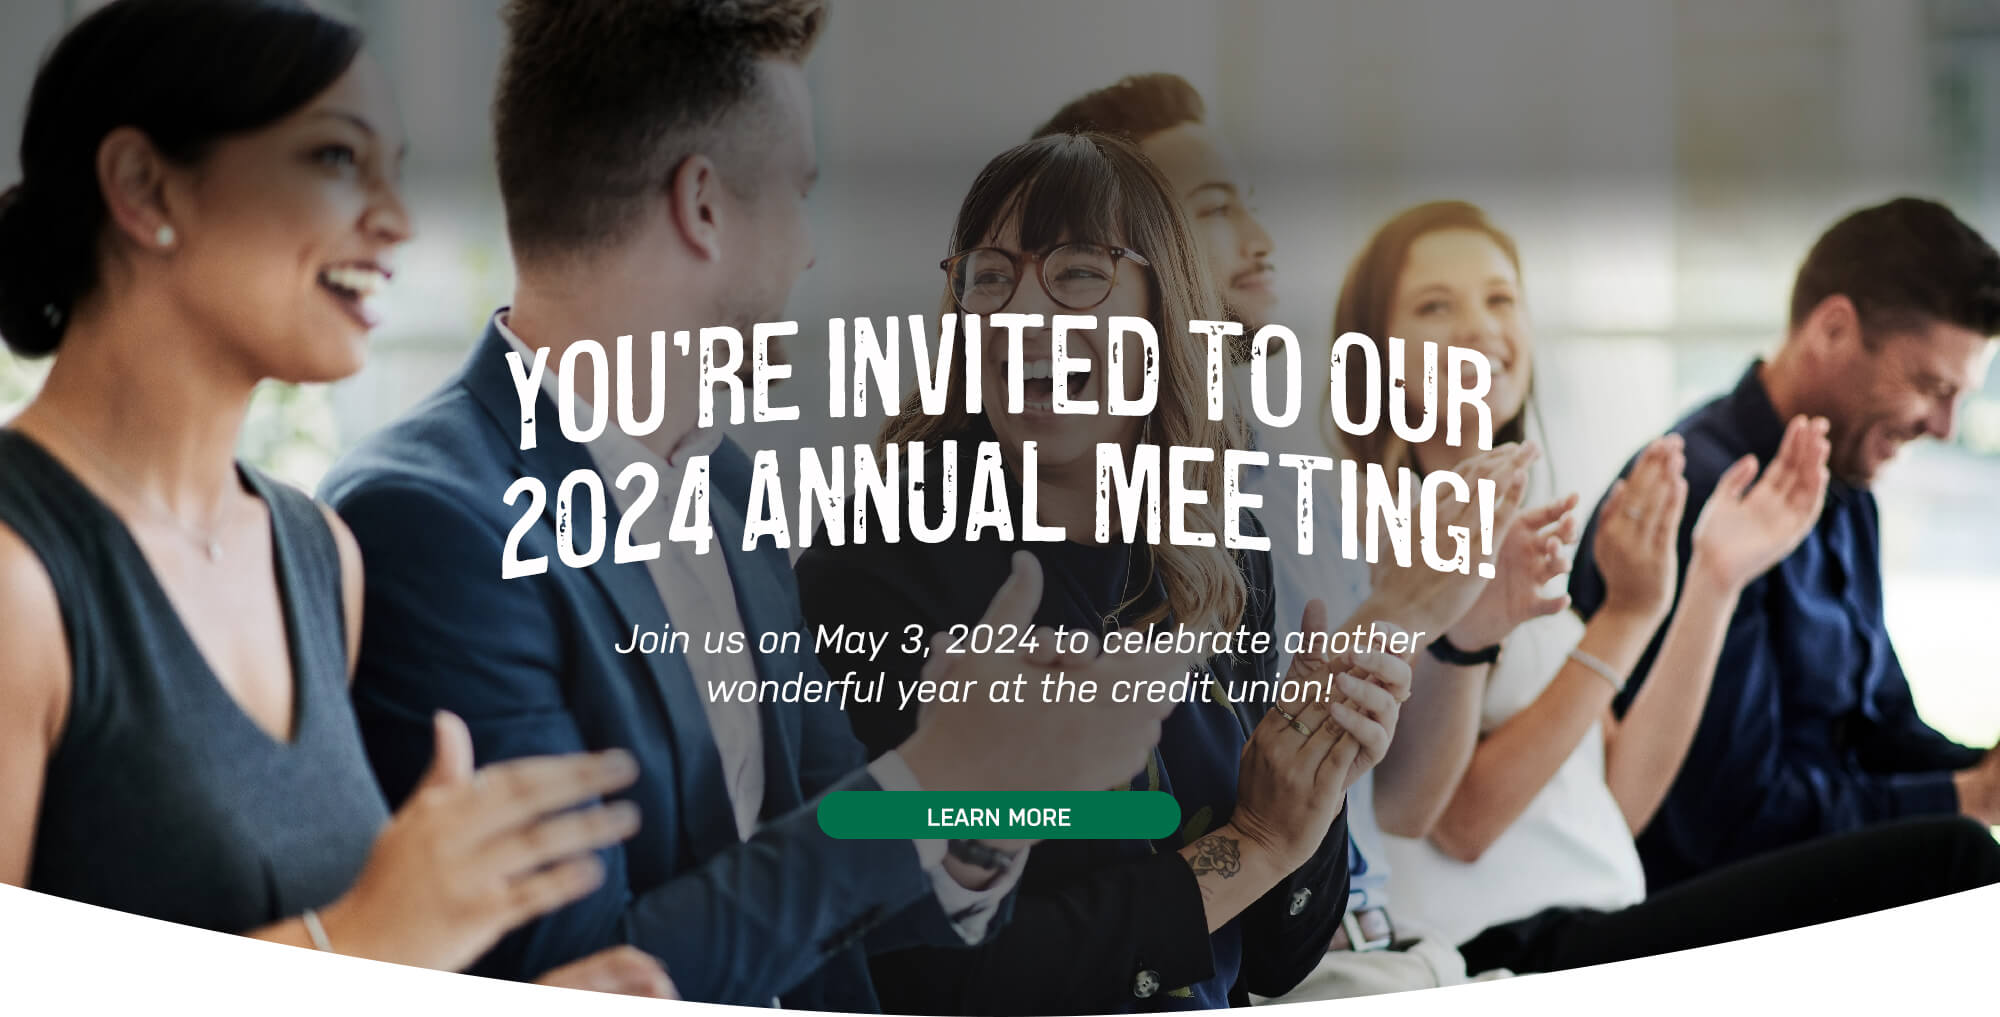 You're invited to our 2024 Annual Meeting! Join us on May 3, 2024 to celebrate another wonderful year at the credit union! Learn more